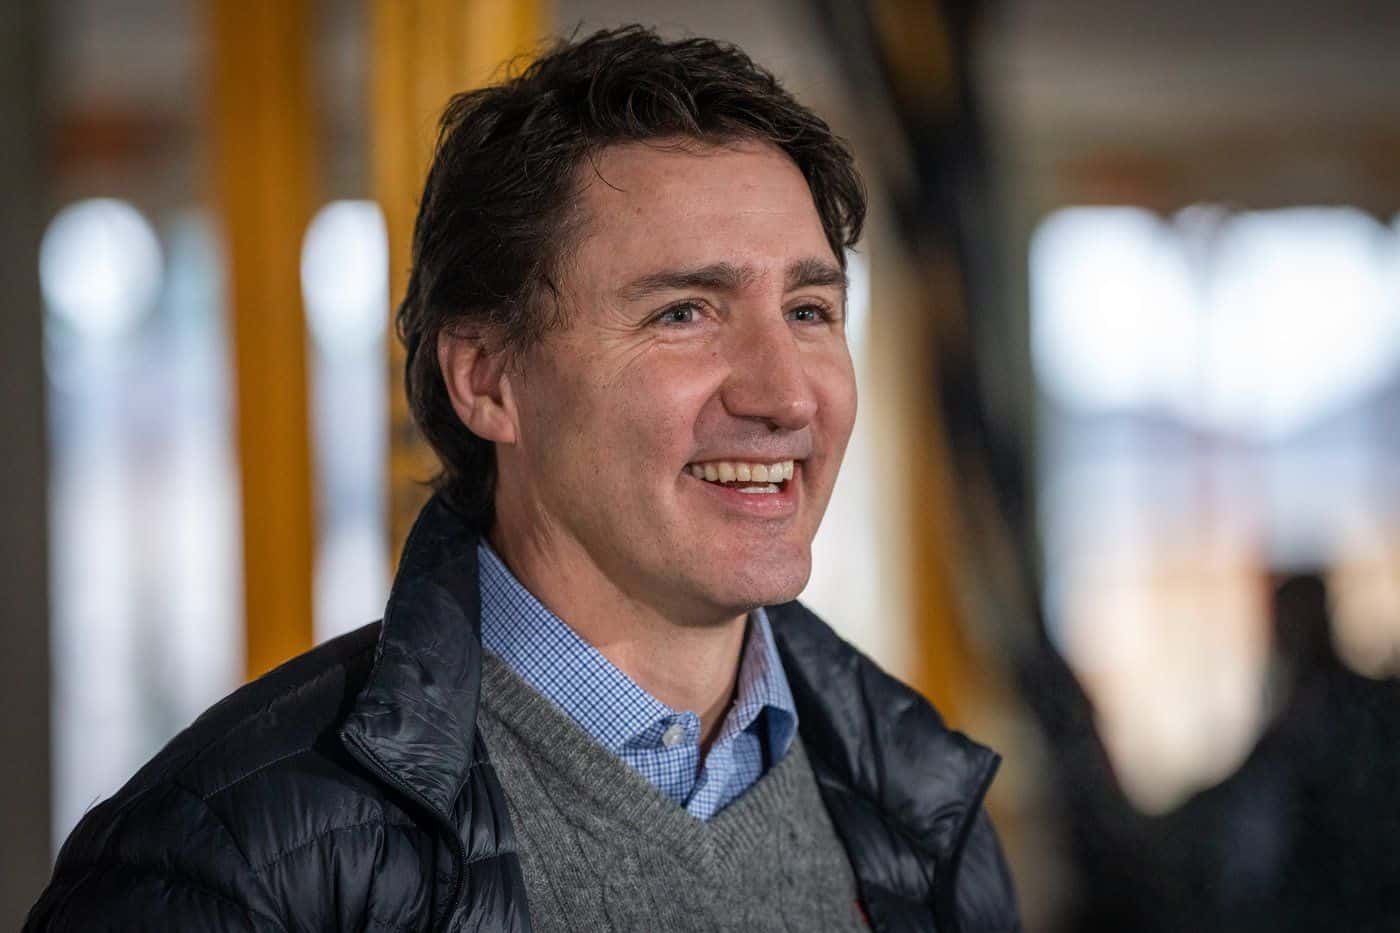 Prime Minister Trudeau heading to Jamaica for Christmas vacation